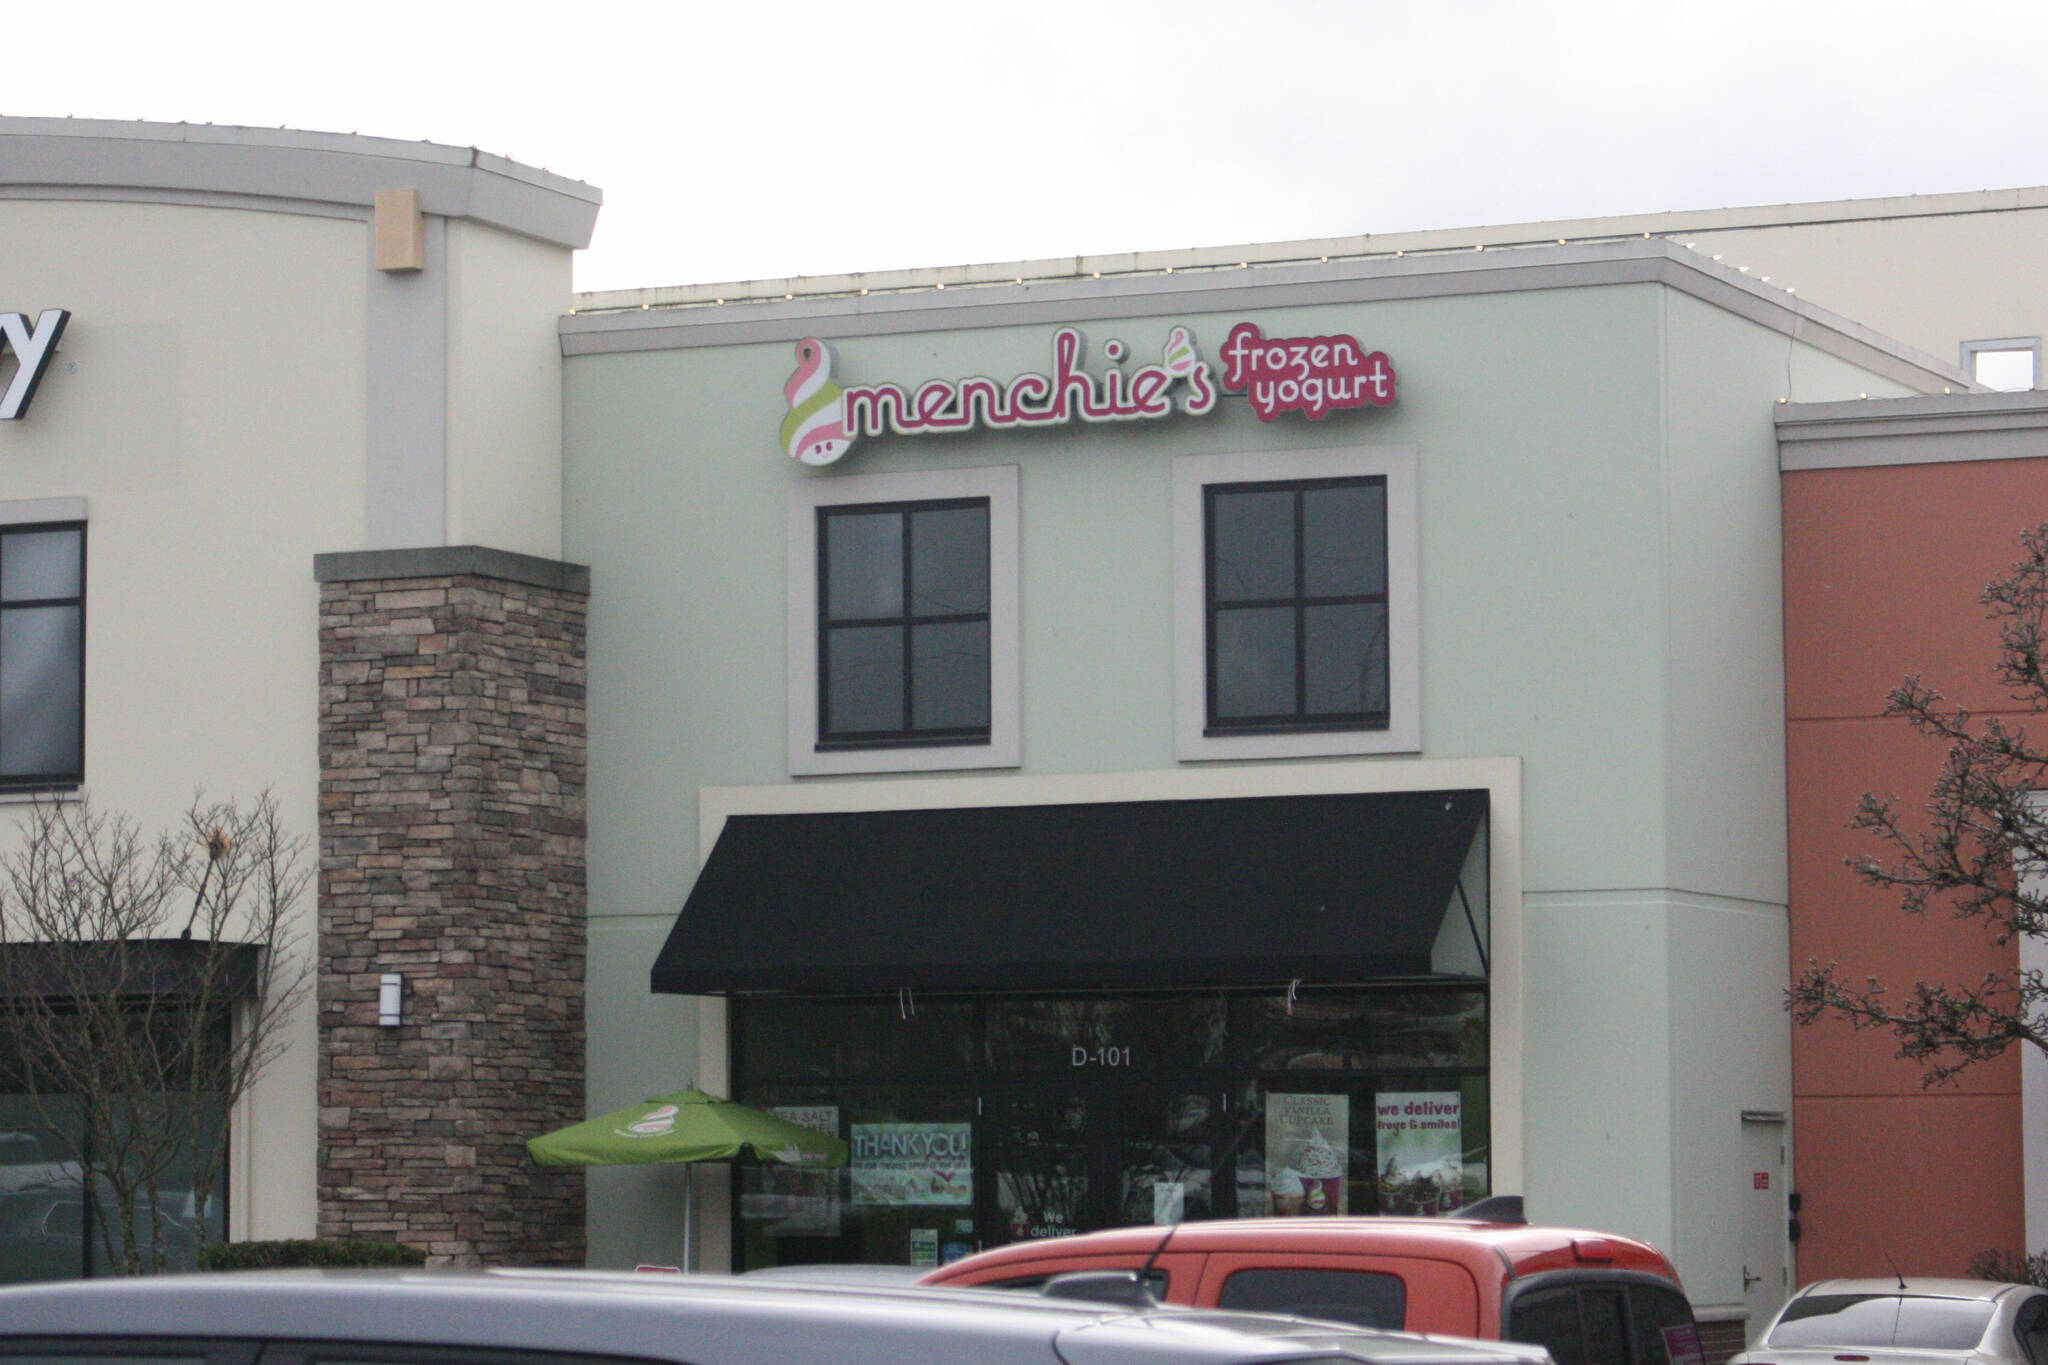 Federal investigation finds that multiple Menchie’s location failed to pay workers, stole tips